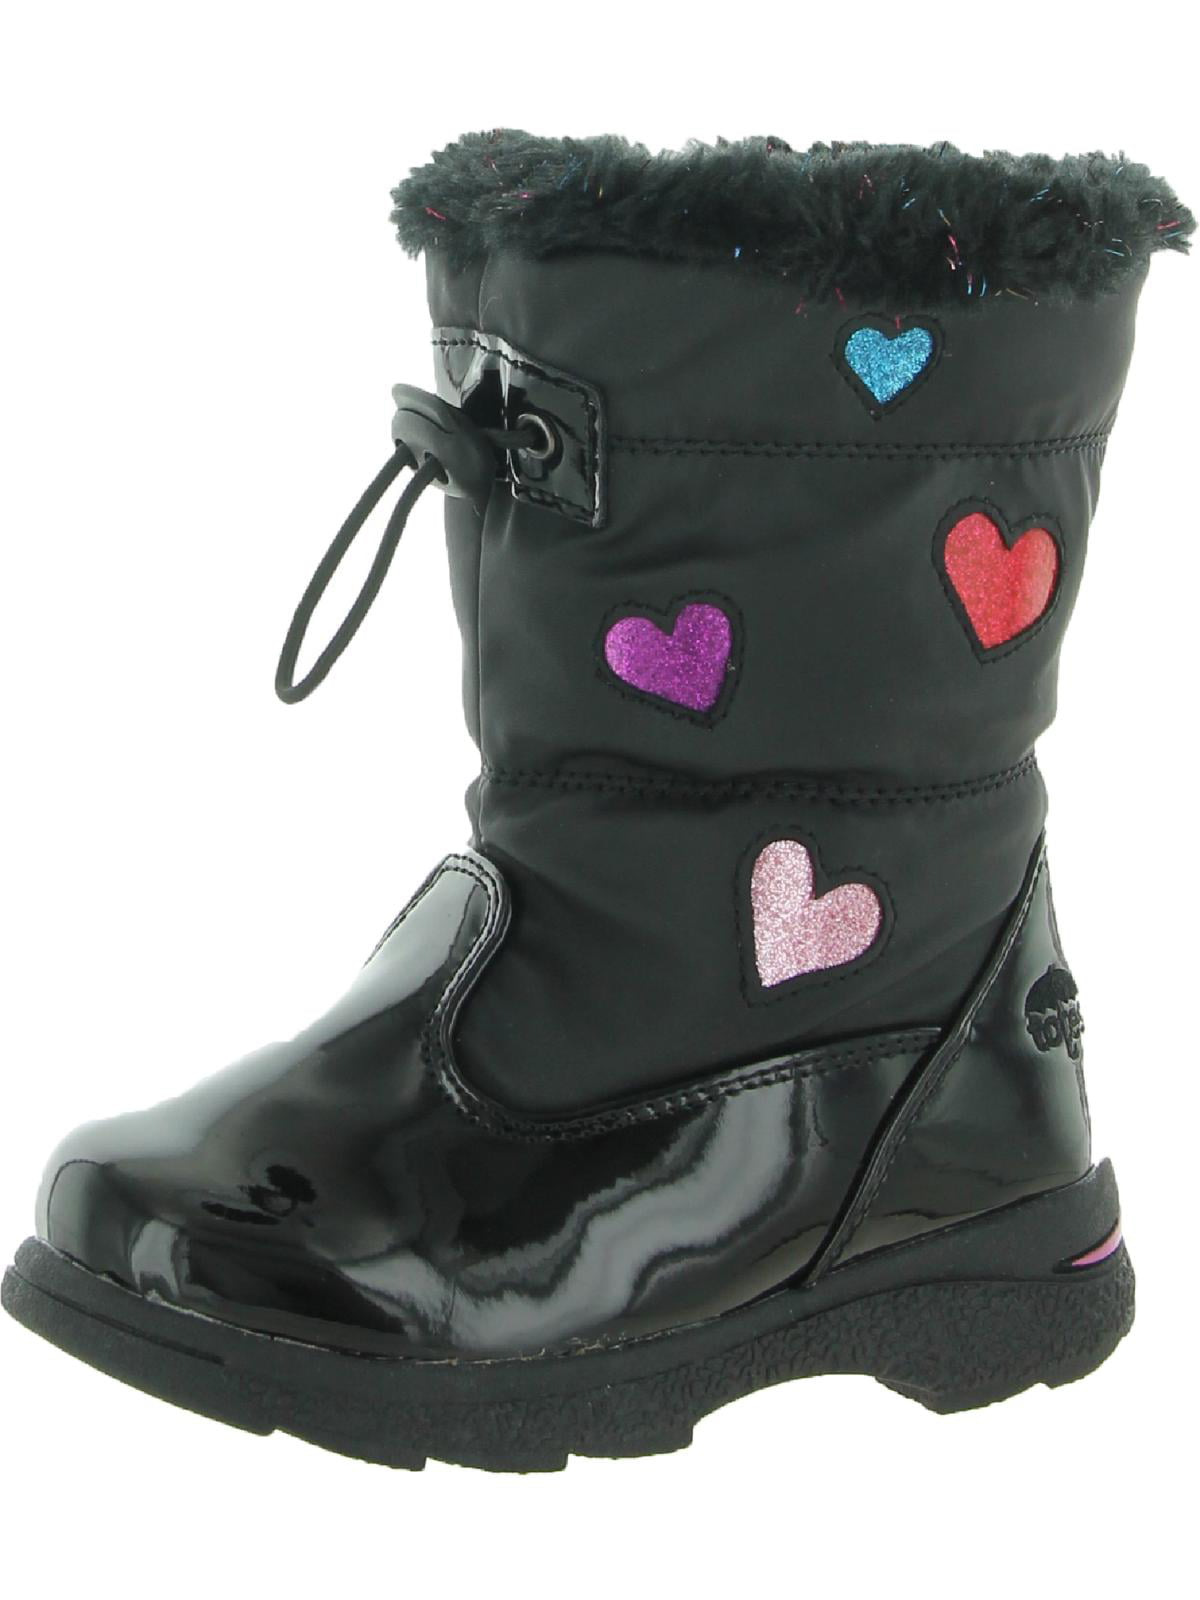 New $60 Girl’s Toddler Totes Maddie Black Cold Weather Winter Boots 6 or 8 